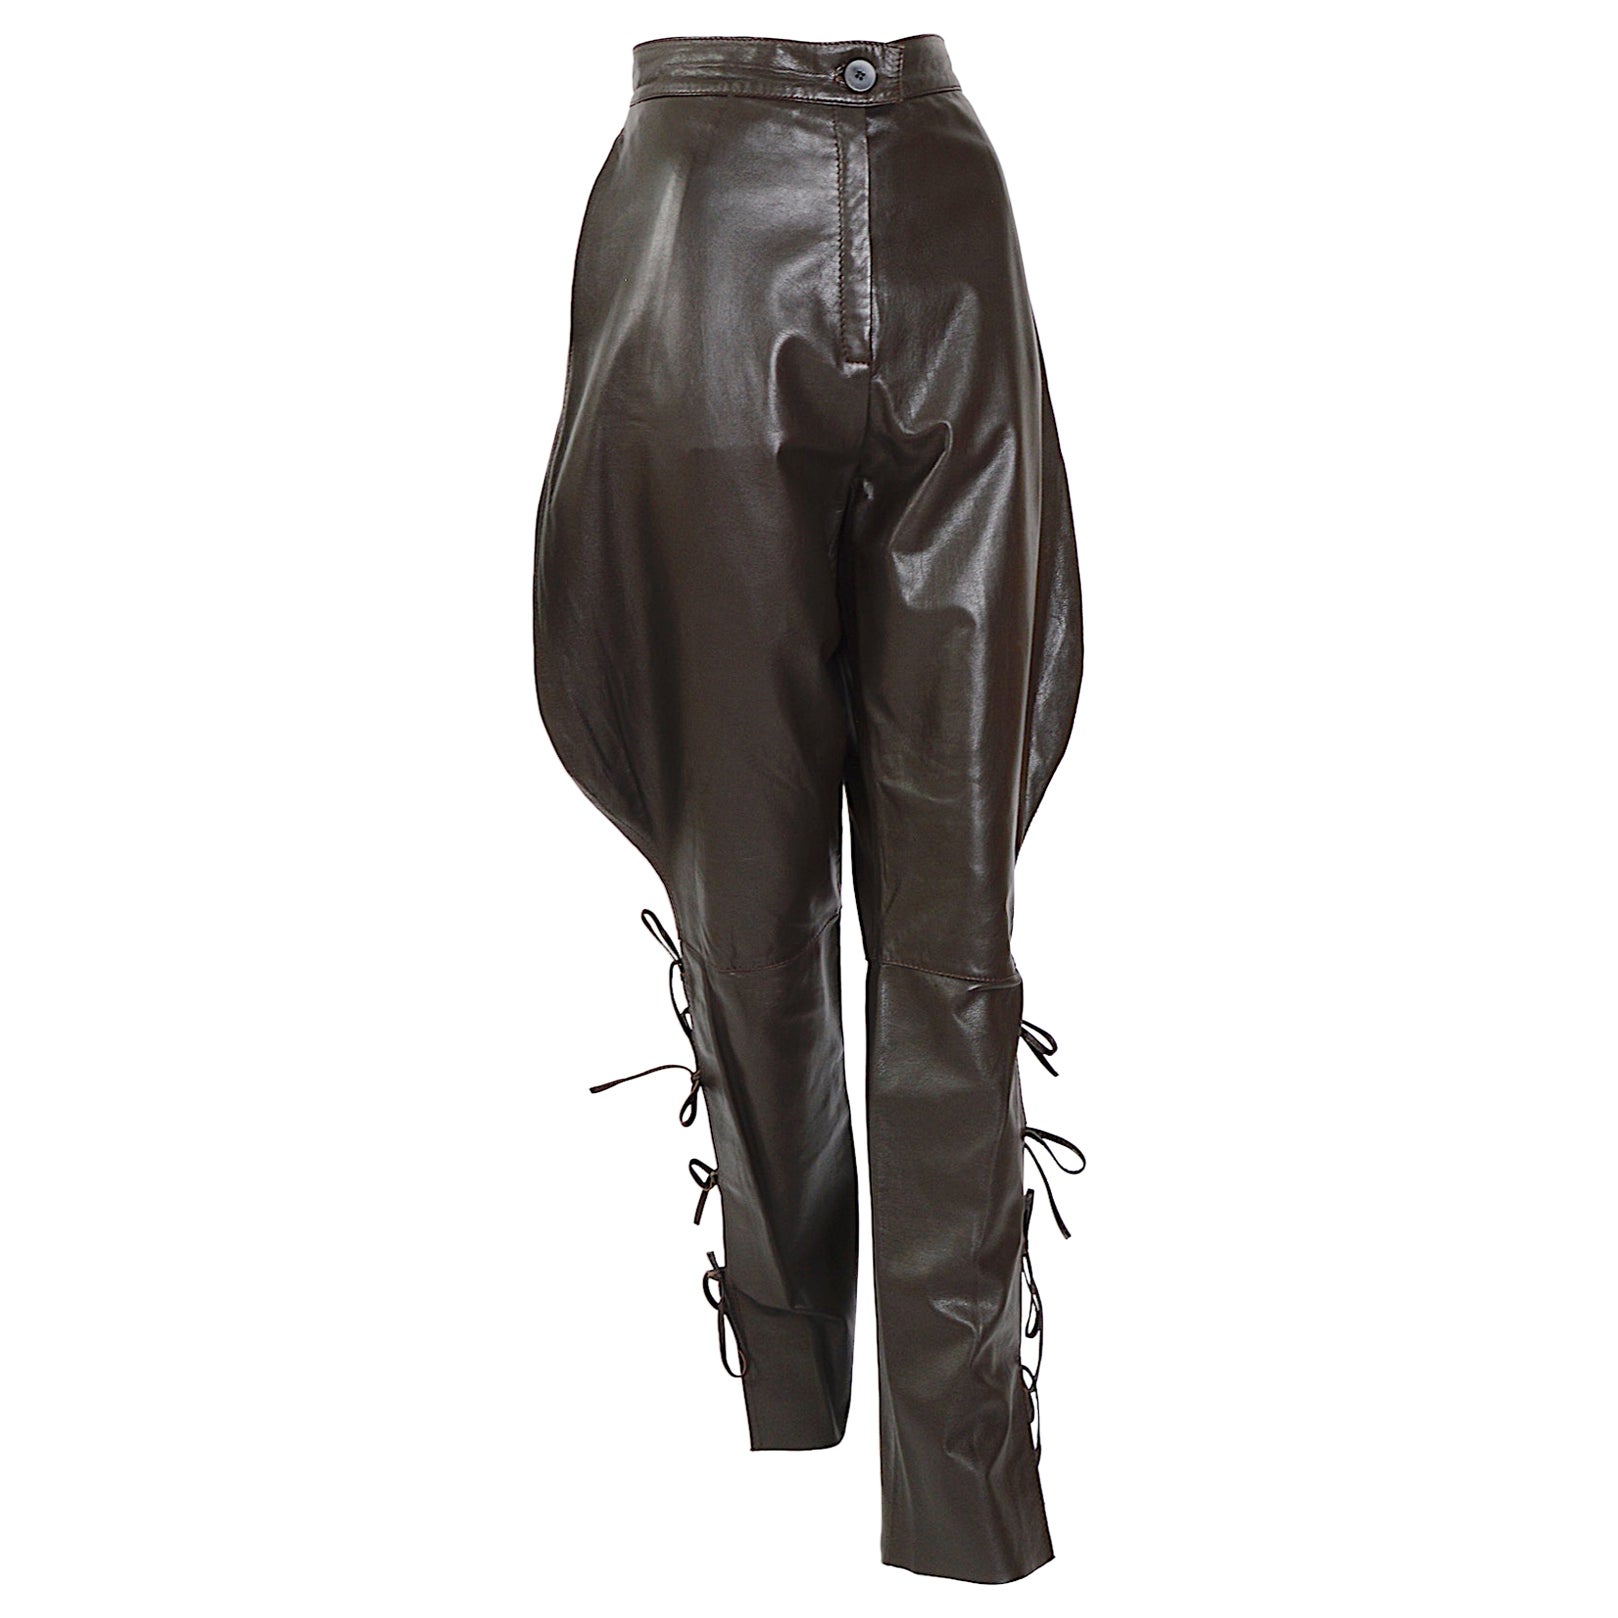 Vintage 1970s unsigned exquisite equestrian style brown leather jodhpur pants For Sale